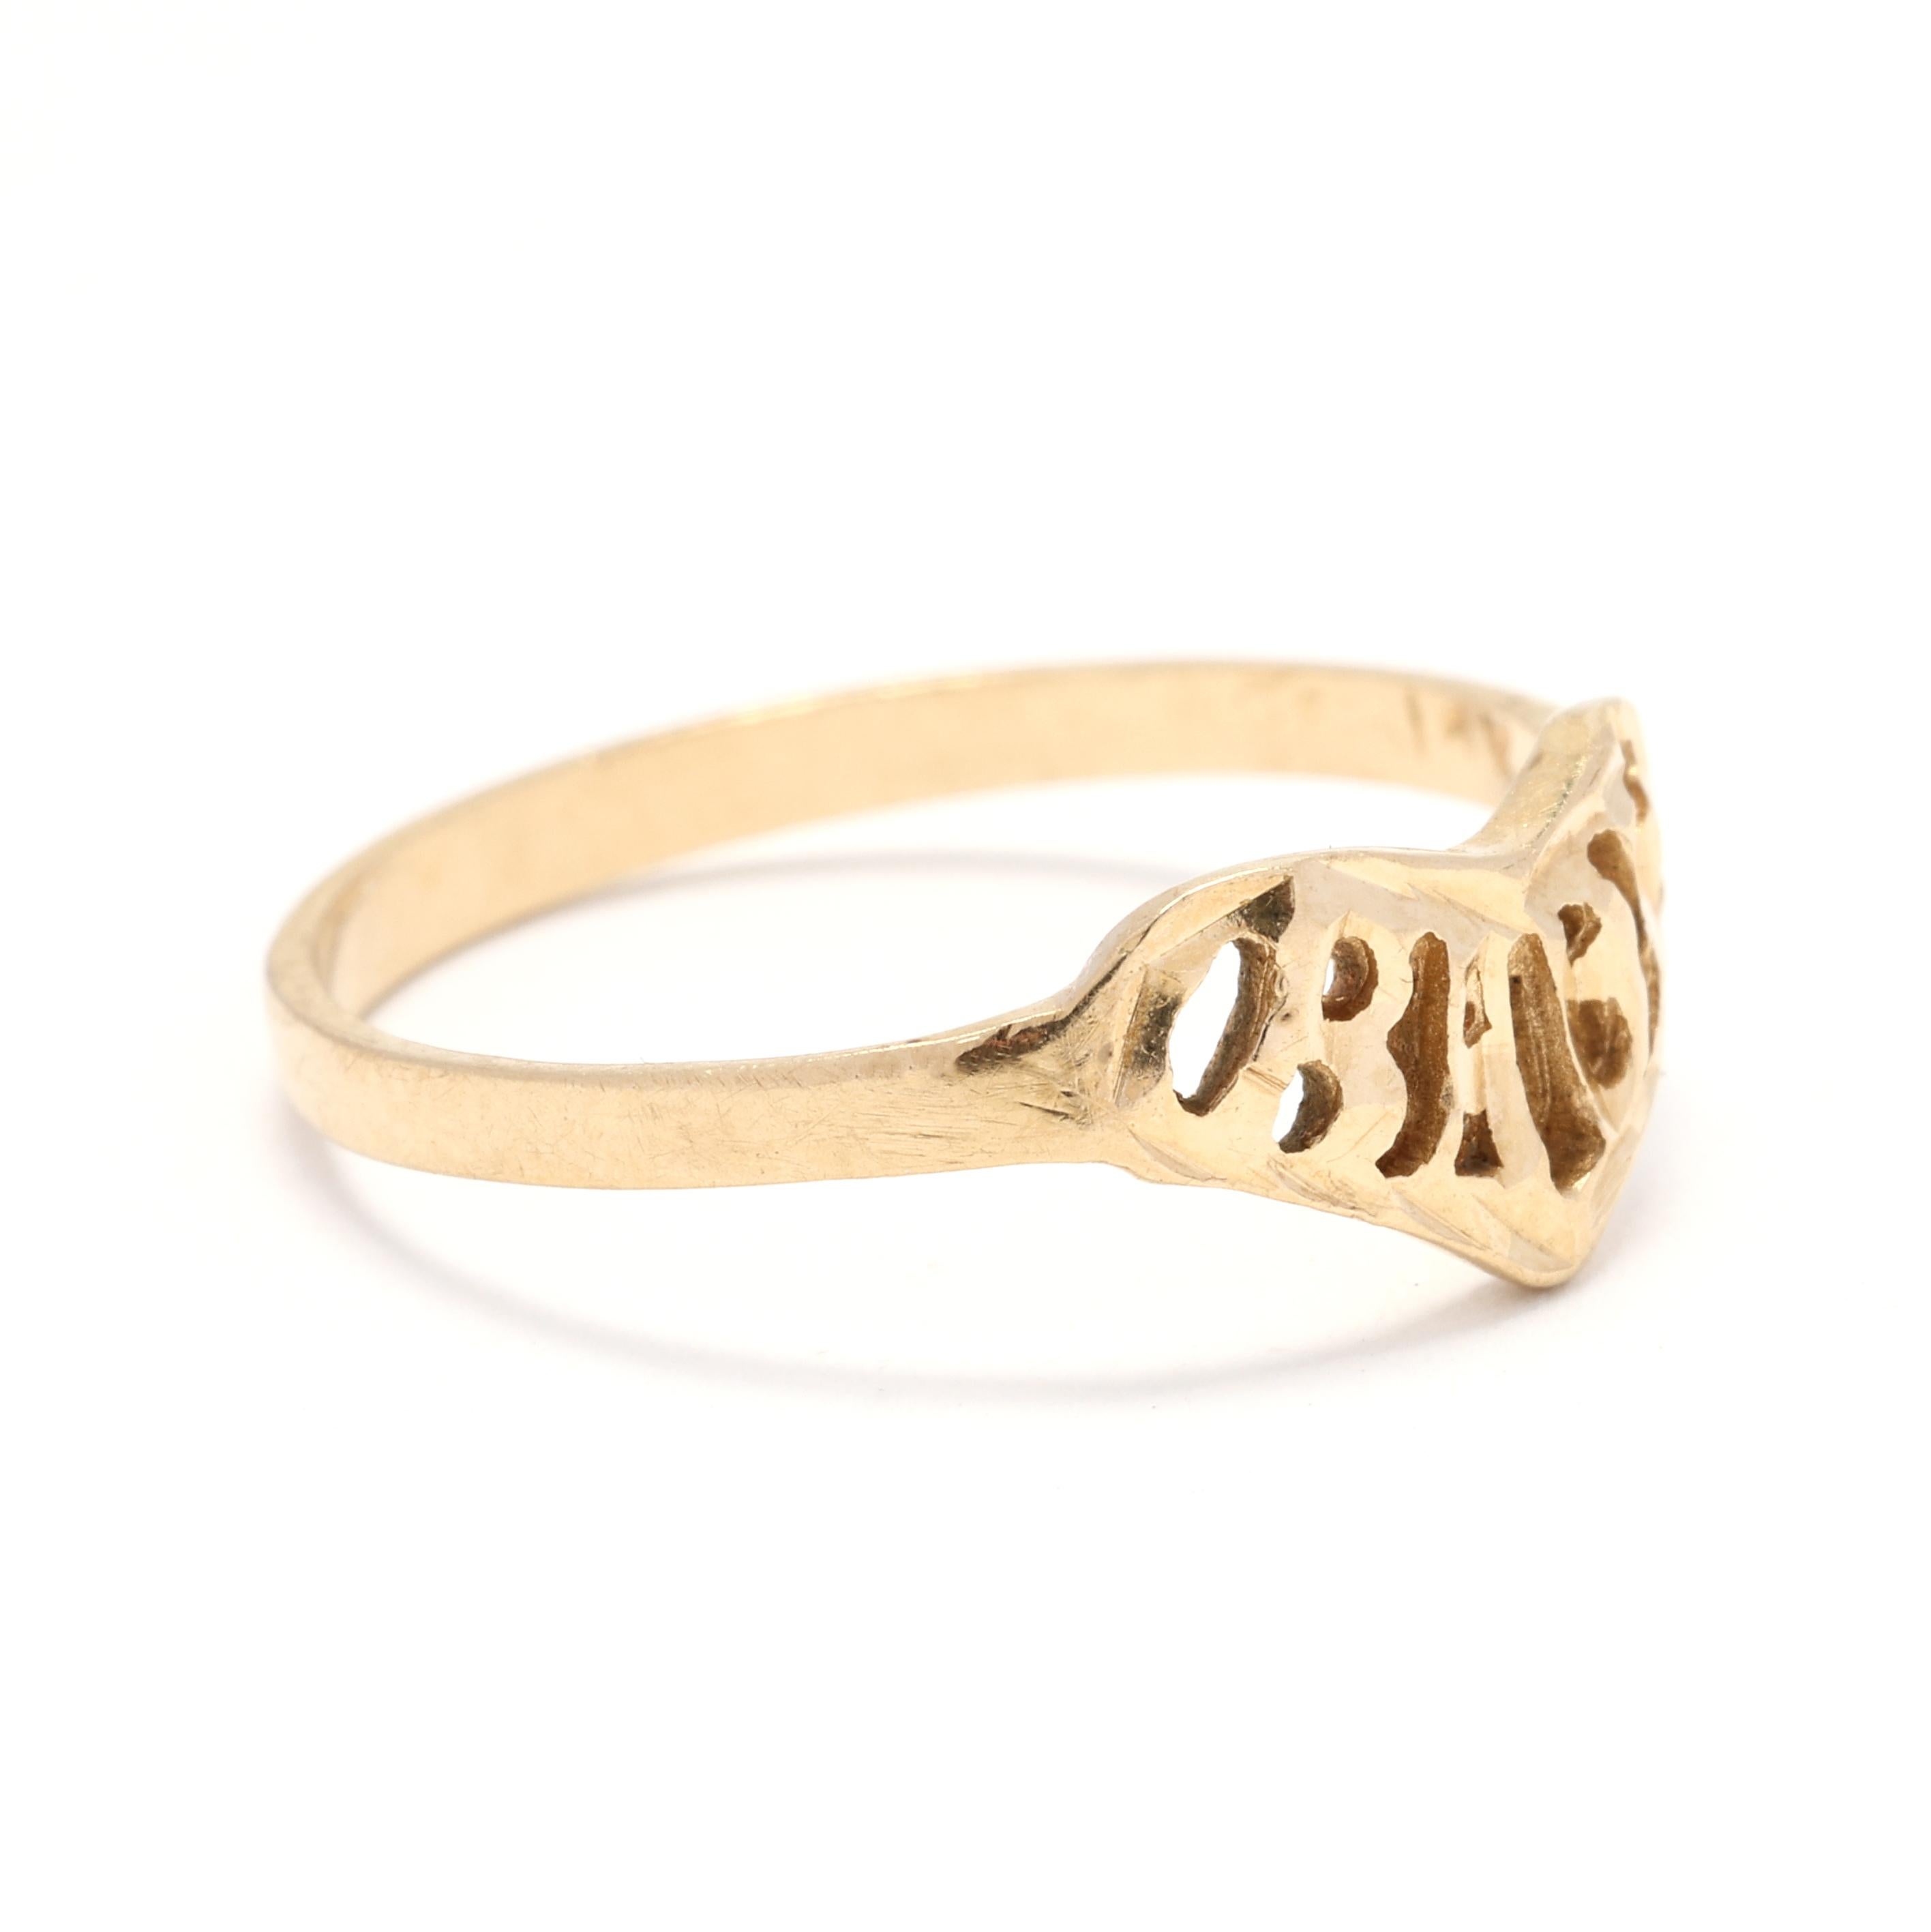 This stunning 14k yellow gold ring features a delicate script font, spelling out 